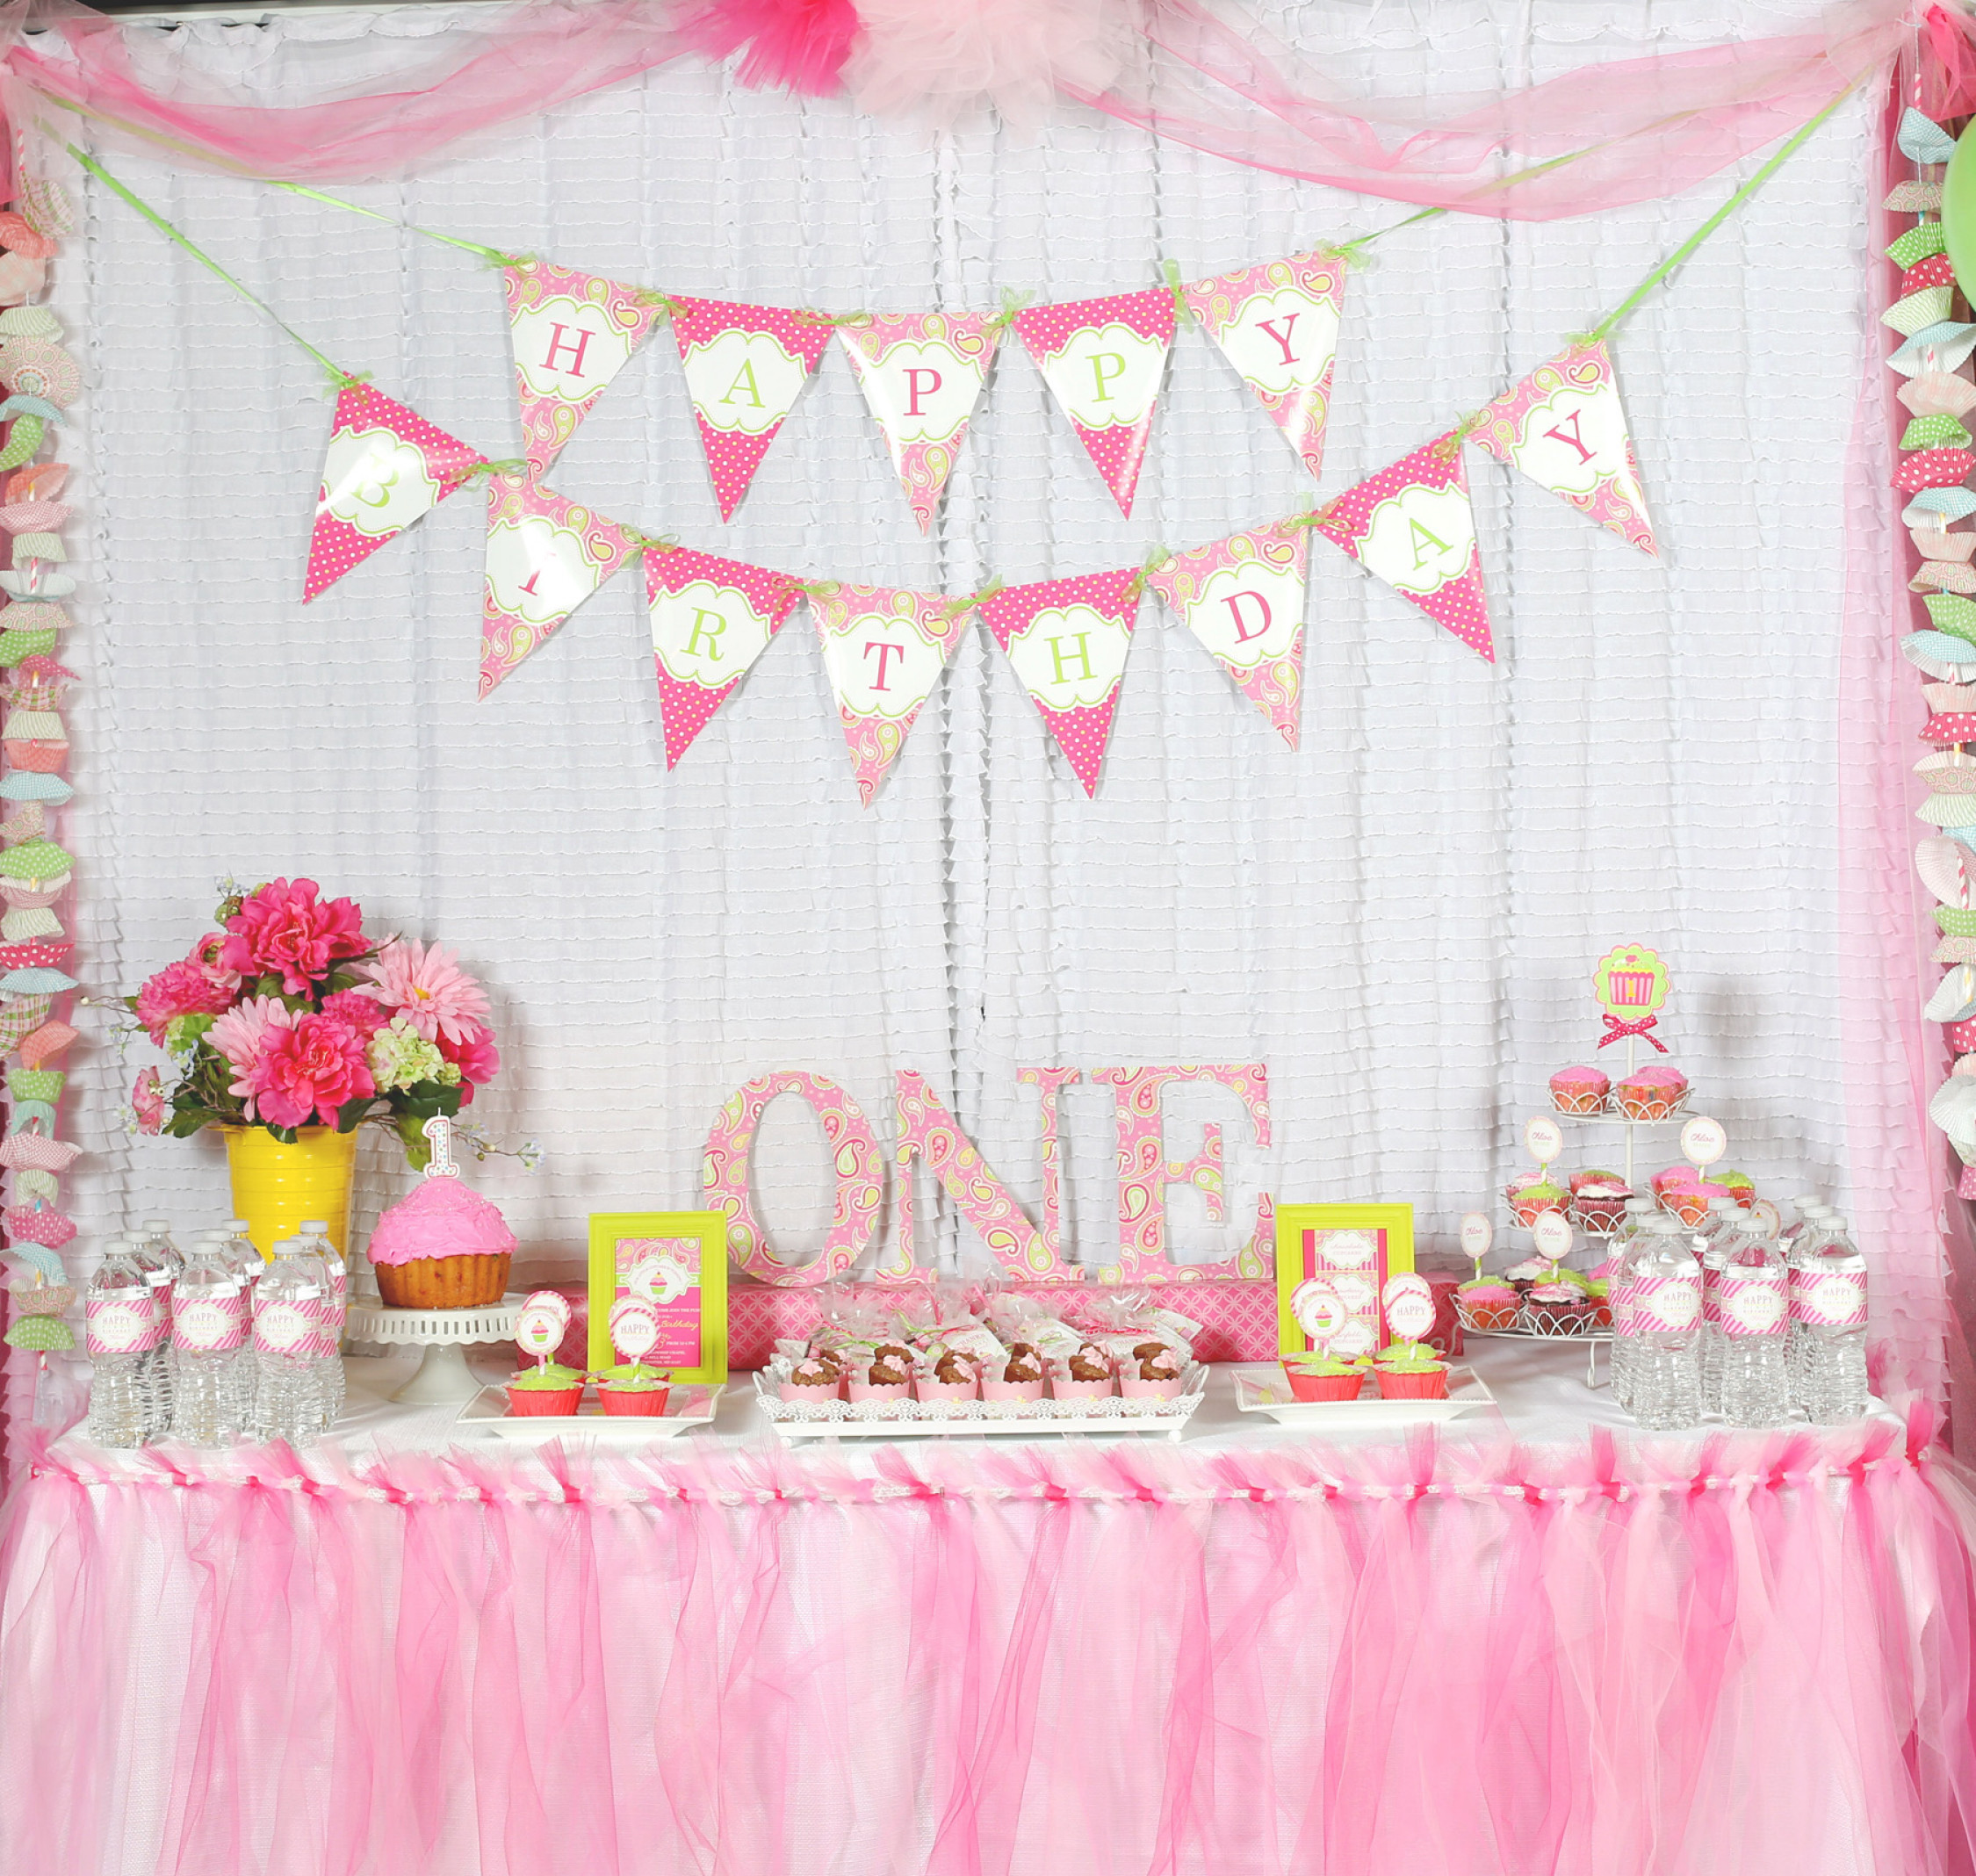 1st Birthday Party Ideas Girl
 A Cupcake Themed 1st Birthday party with Paisley and Polka